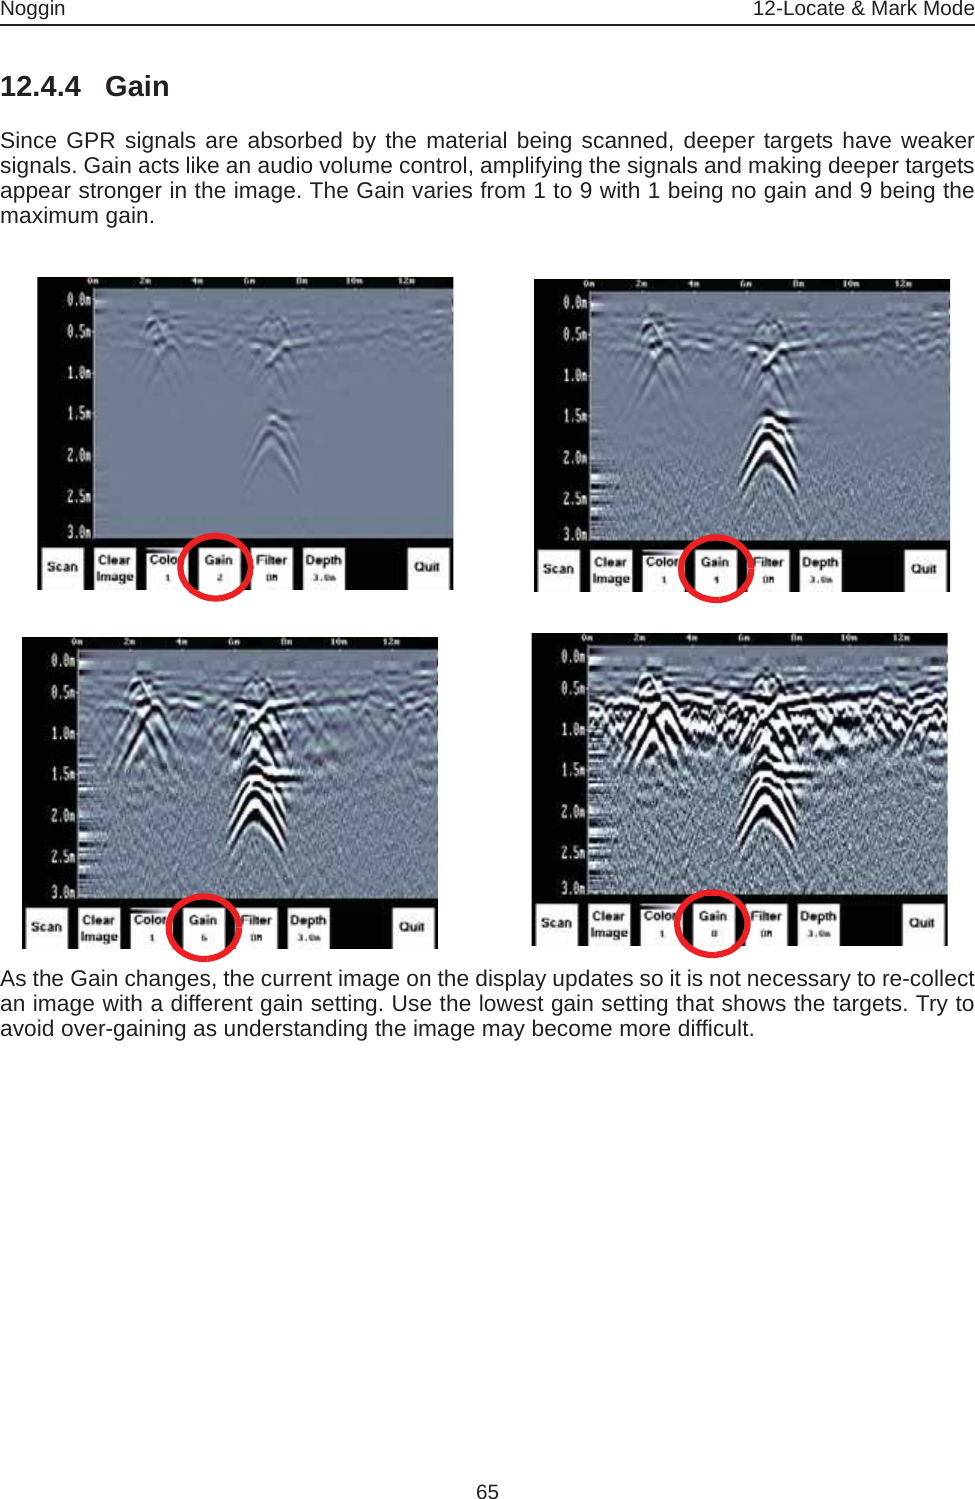 Noggin 12-Locate &amp; Mark Mode6512.4.4 GainSince GPR signals are absorbed by the material being scanned, deeper targets have weakersignals. Gain acts like an audio volume control, amplifying the signals and making deeper targetsappear stronger in the image. The Gain varies from 1 to 9 with 1 being no gain and 9 being themaximum gain. As the Gain changes, the current image on the display updates so it is not necessary to re-collectan image with a different gain setting. Use the lowest gain setting that shows the targets. Try toavoid over-gaining as understanding the image may become more difficult.